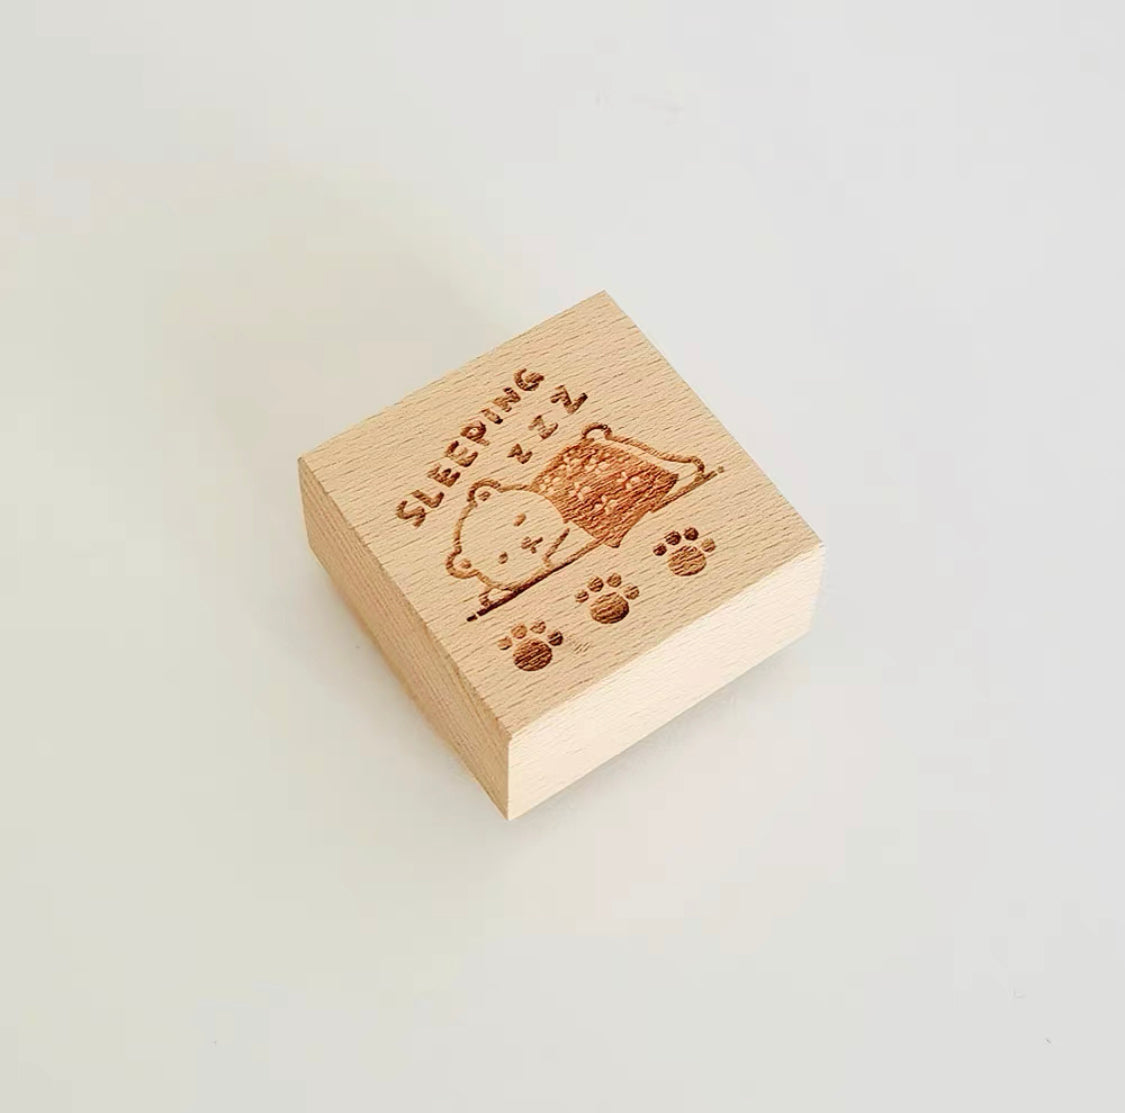 Ever&Ein panda and bear rubber stamp series